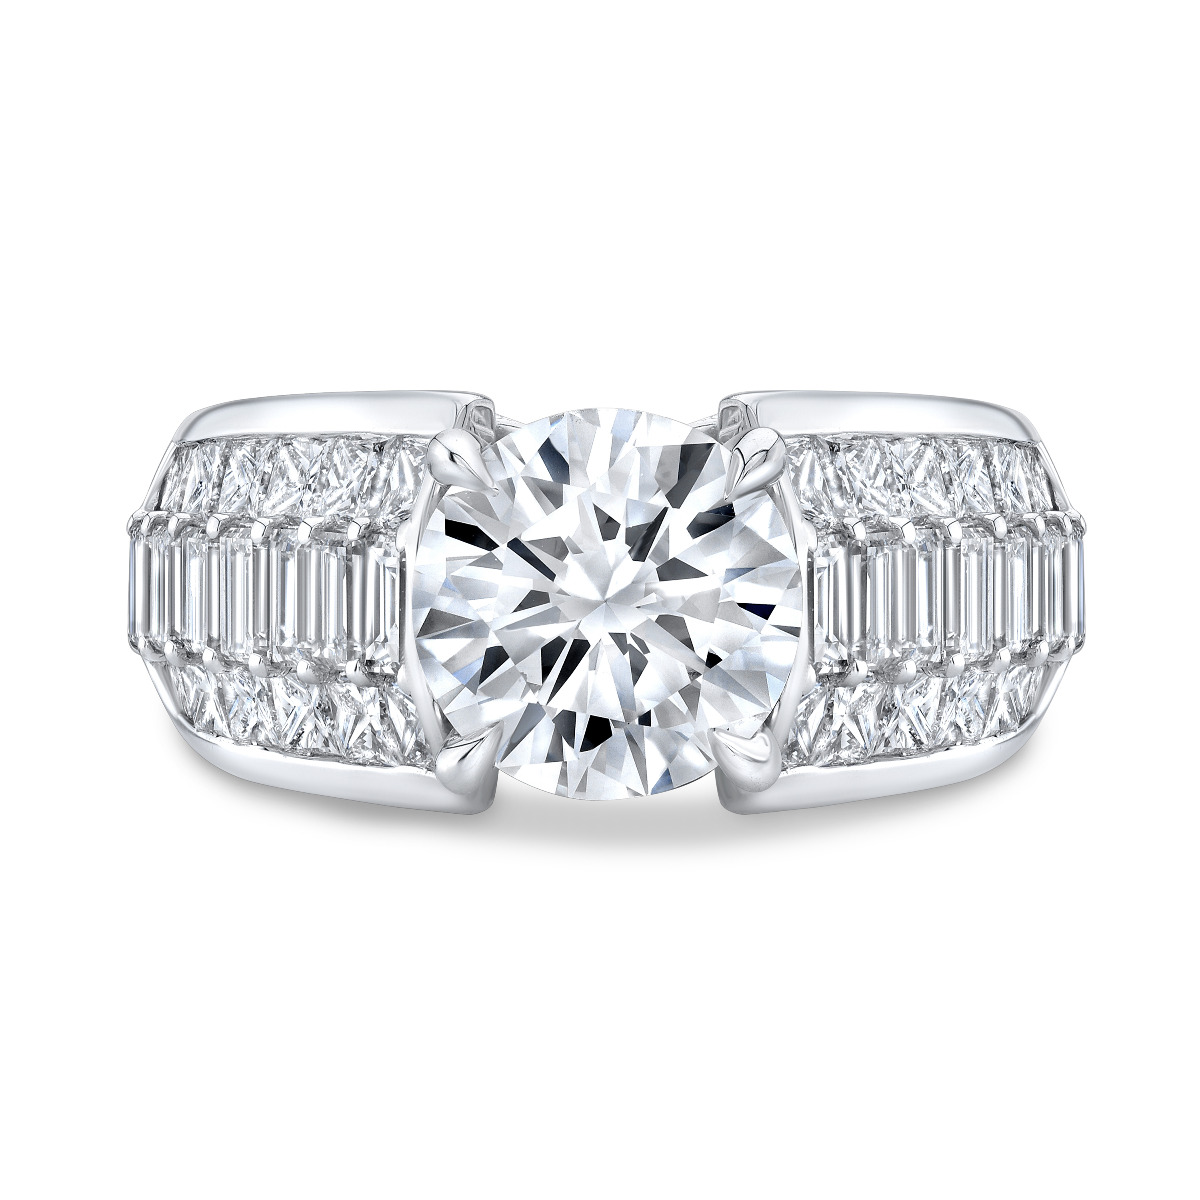 You can never go wrong with this beauty. It features 24 Princess Cut diamonds and 16 Baguettes that comes out to a total of 1.7 carat.